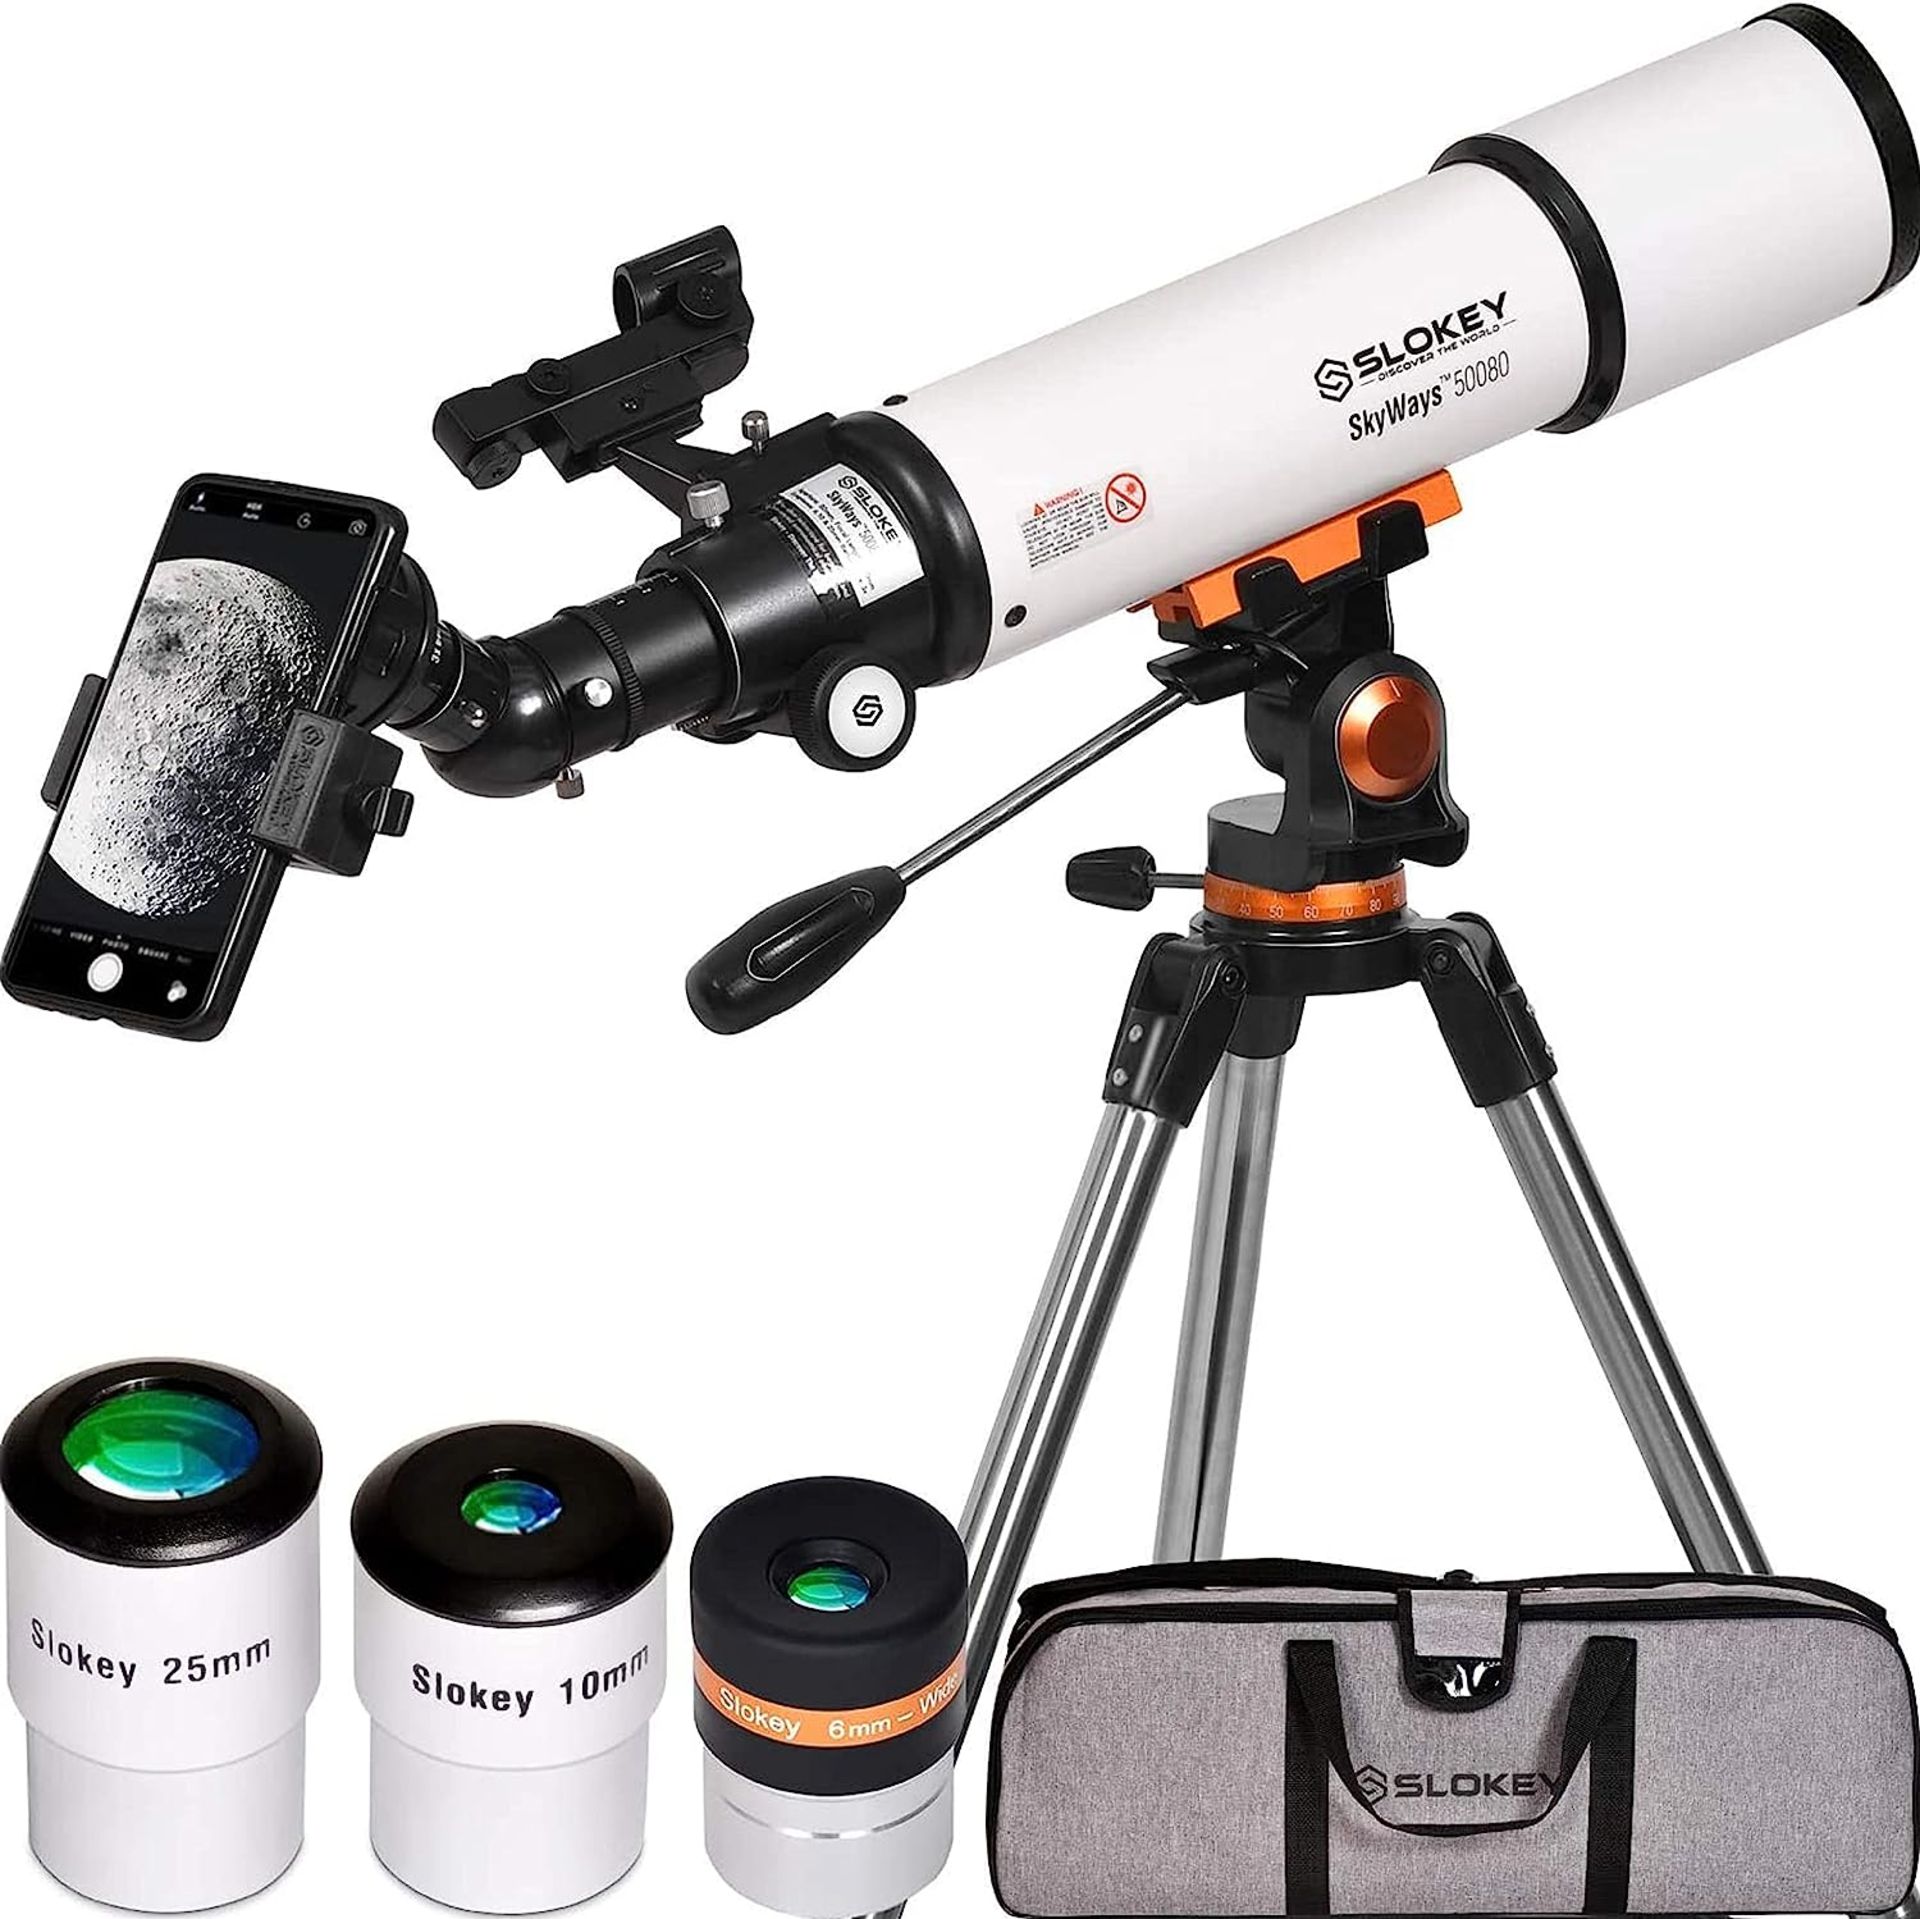 Slokey 50080 Skyways Astronomy Telescope Accessories (AS NEW HOWEVER UNBOXED) - AMAZON RRP Â£249.99! - Image 2 of 7